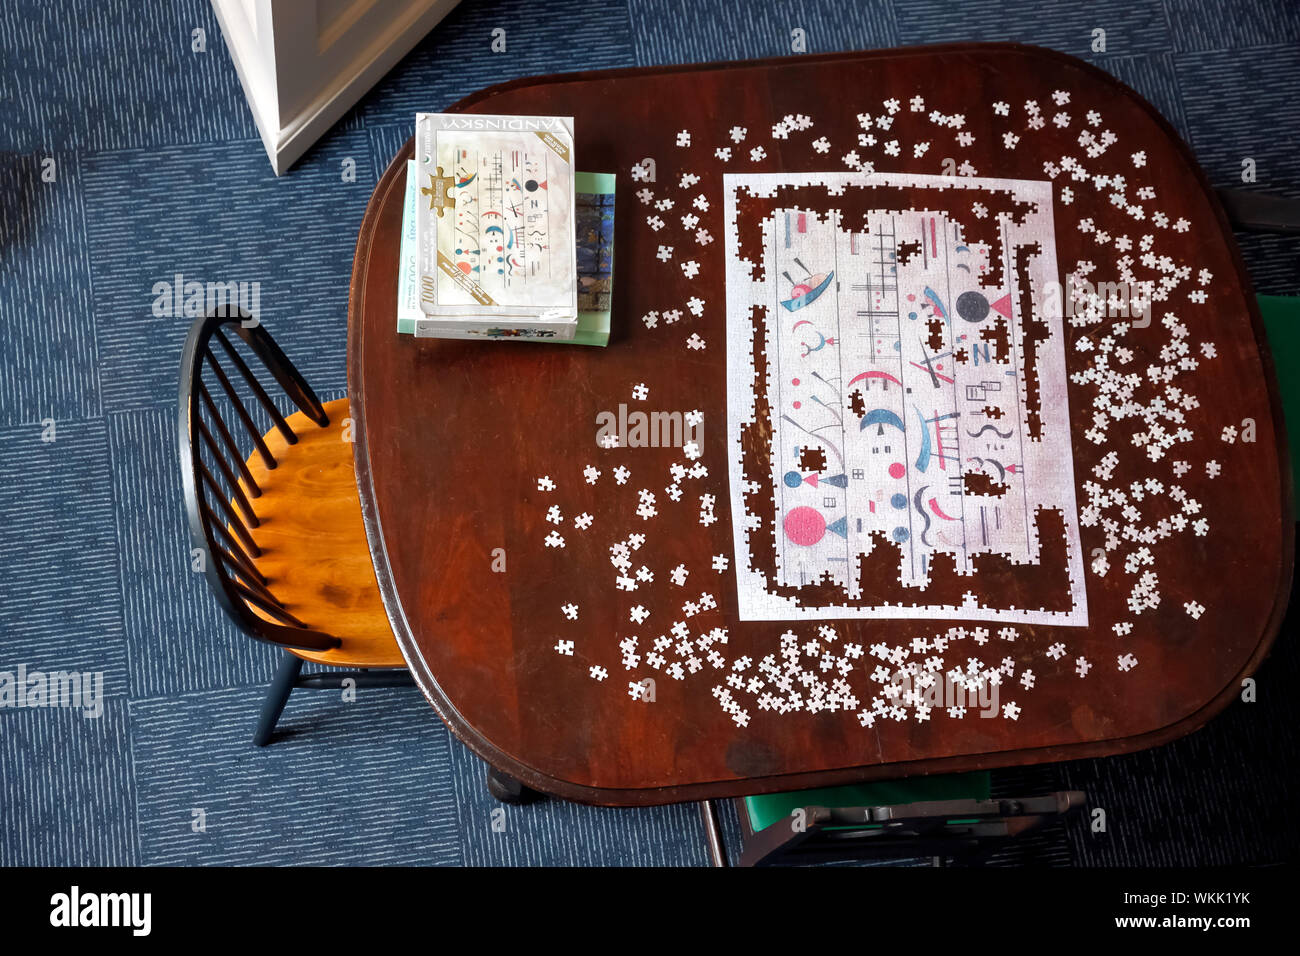 Unsolved jigsaw puzzle on a wooden table. Stock Photo